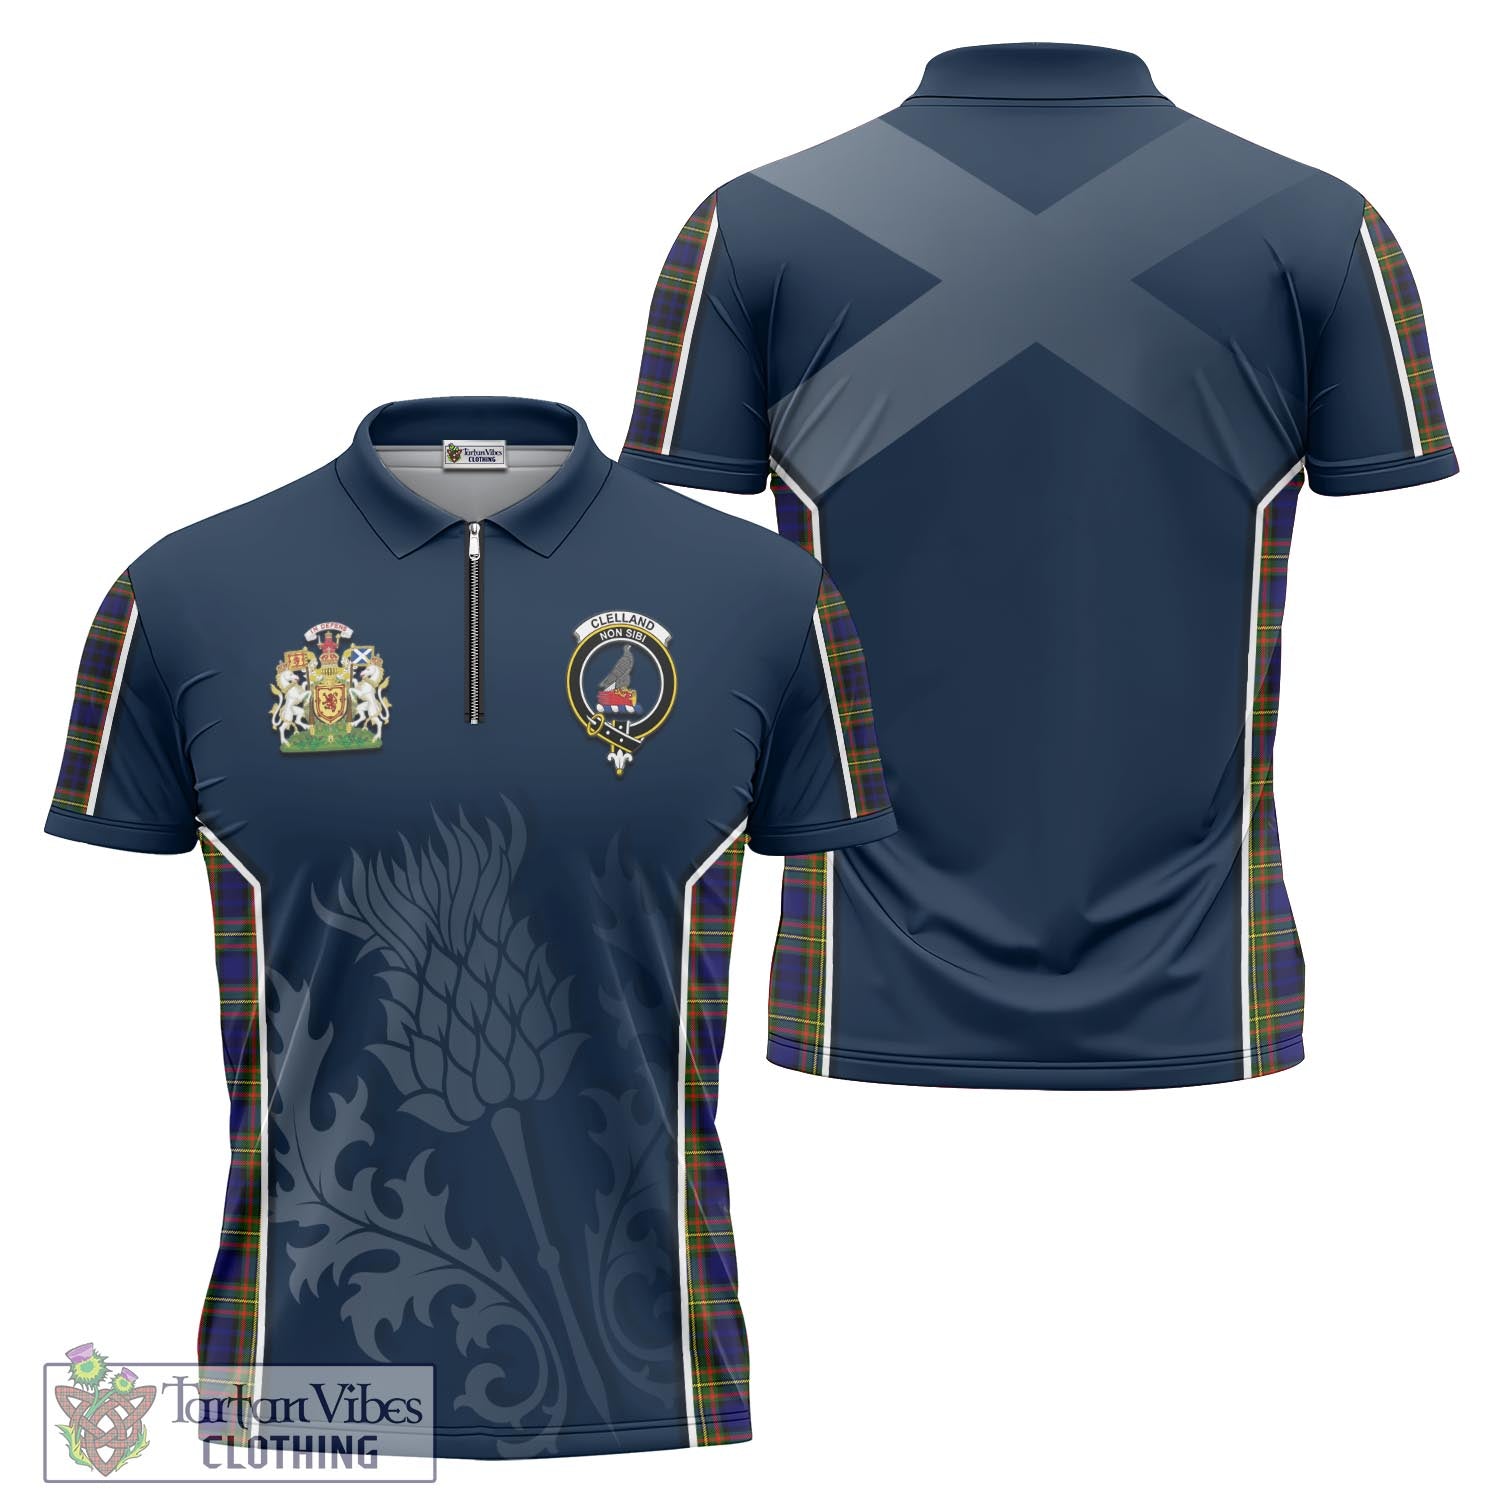 Tartan Vibes Clothing Clelland Modern Tartan Zipper Polo Shirt with Family Crest and Scottish Thistle Vibes Sport Style